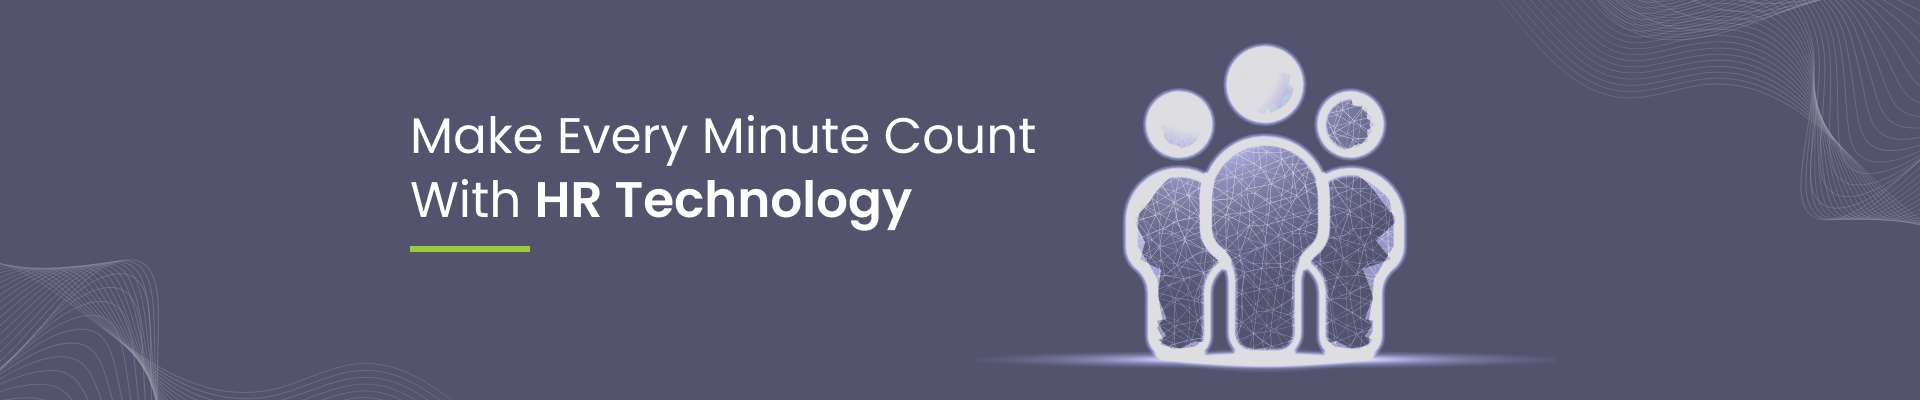 Make Every Minute Count With HR Technology